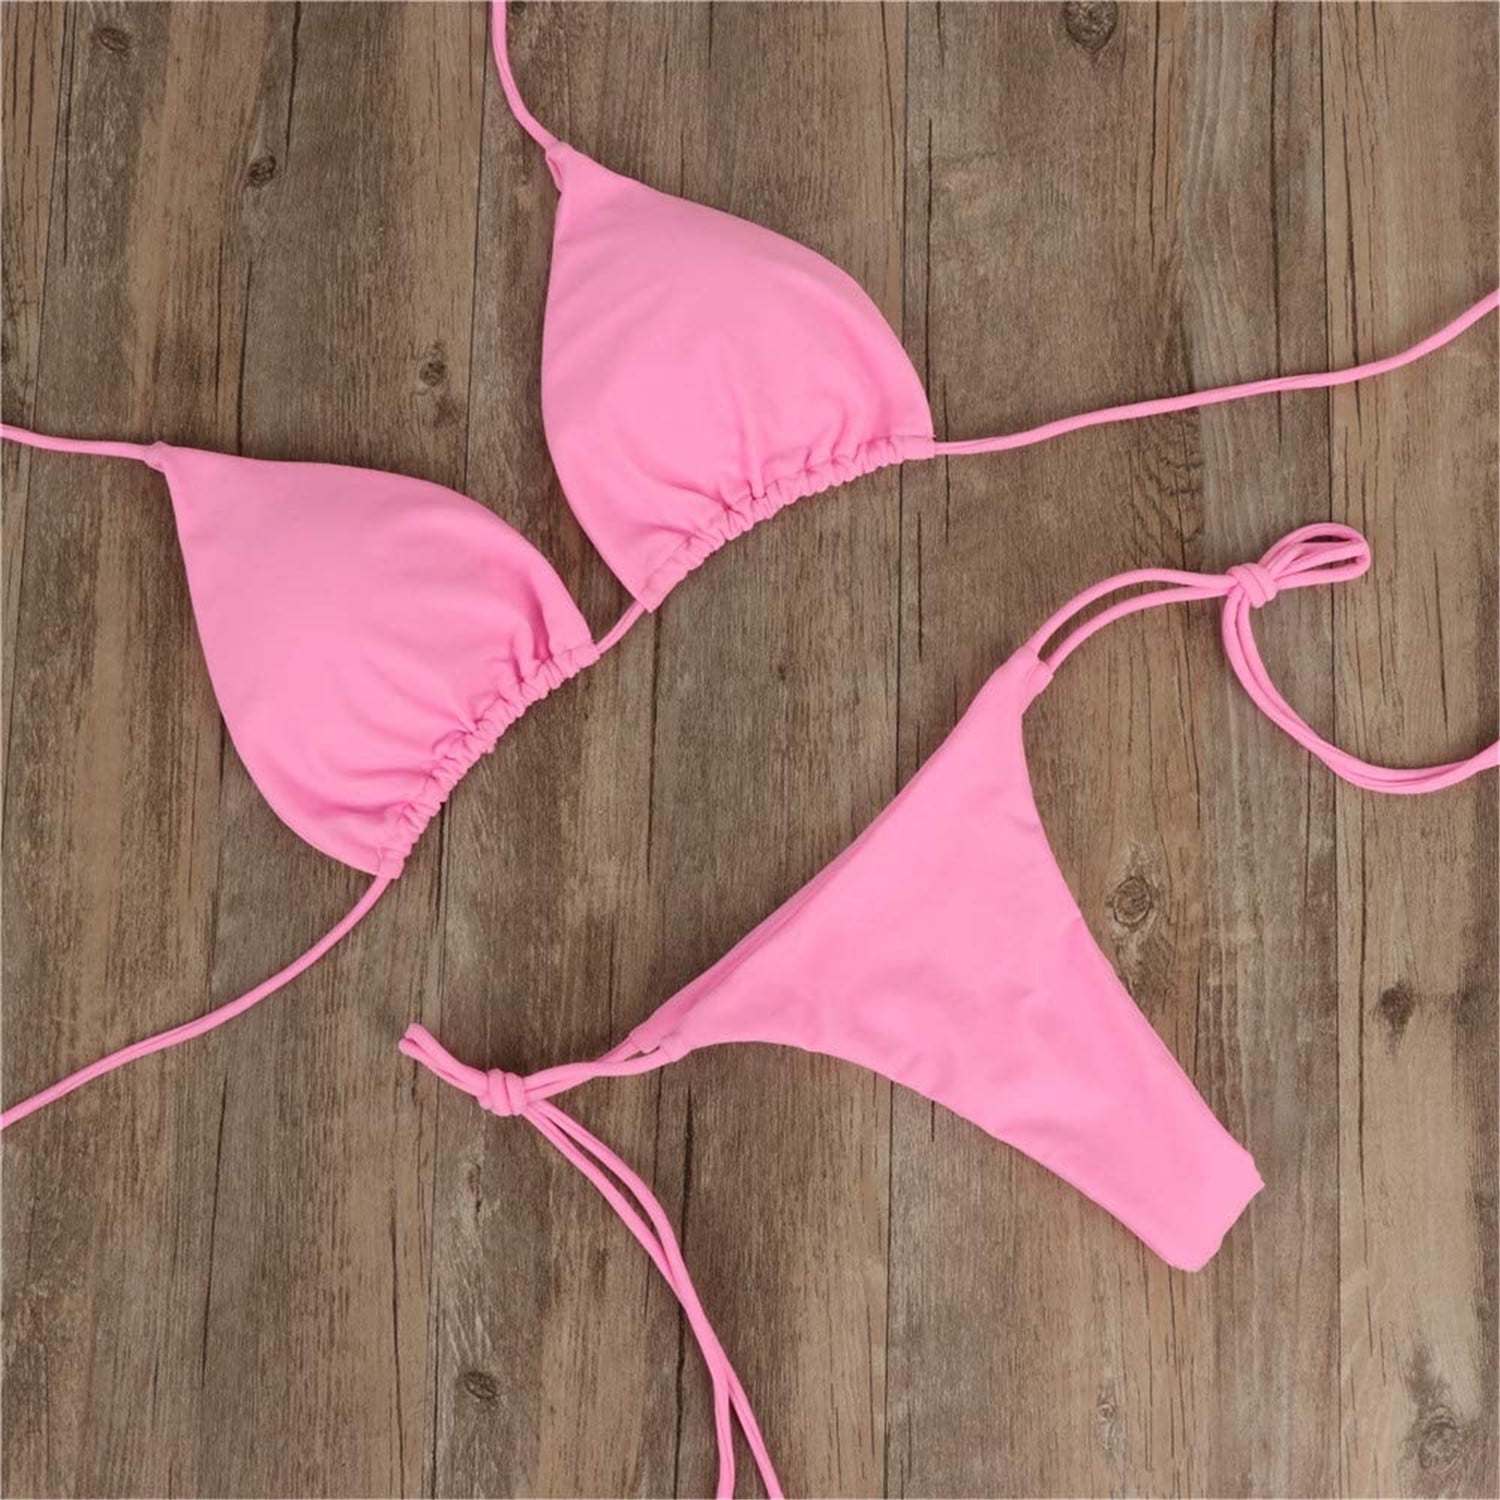 Qiylii Women 2PCS Solid Color Bikini Set, Solid Color Wire-Free Padded  Halter Straps Bra, High Waist Triangle Panty, Summer Swimming Set